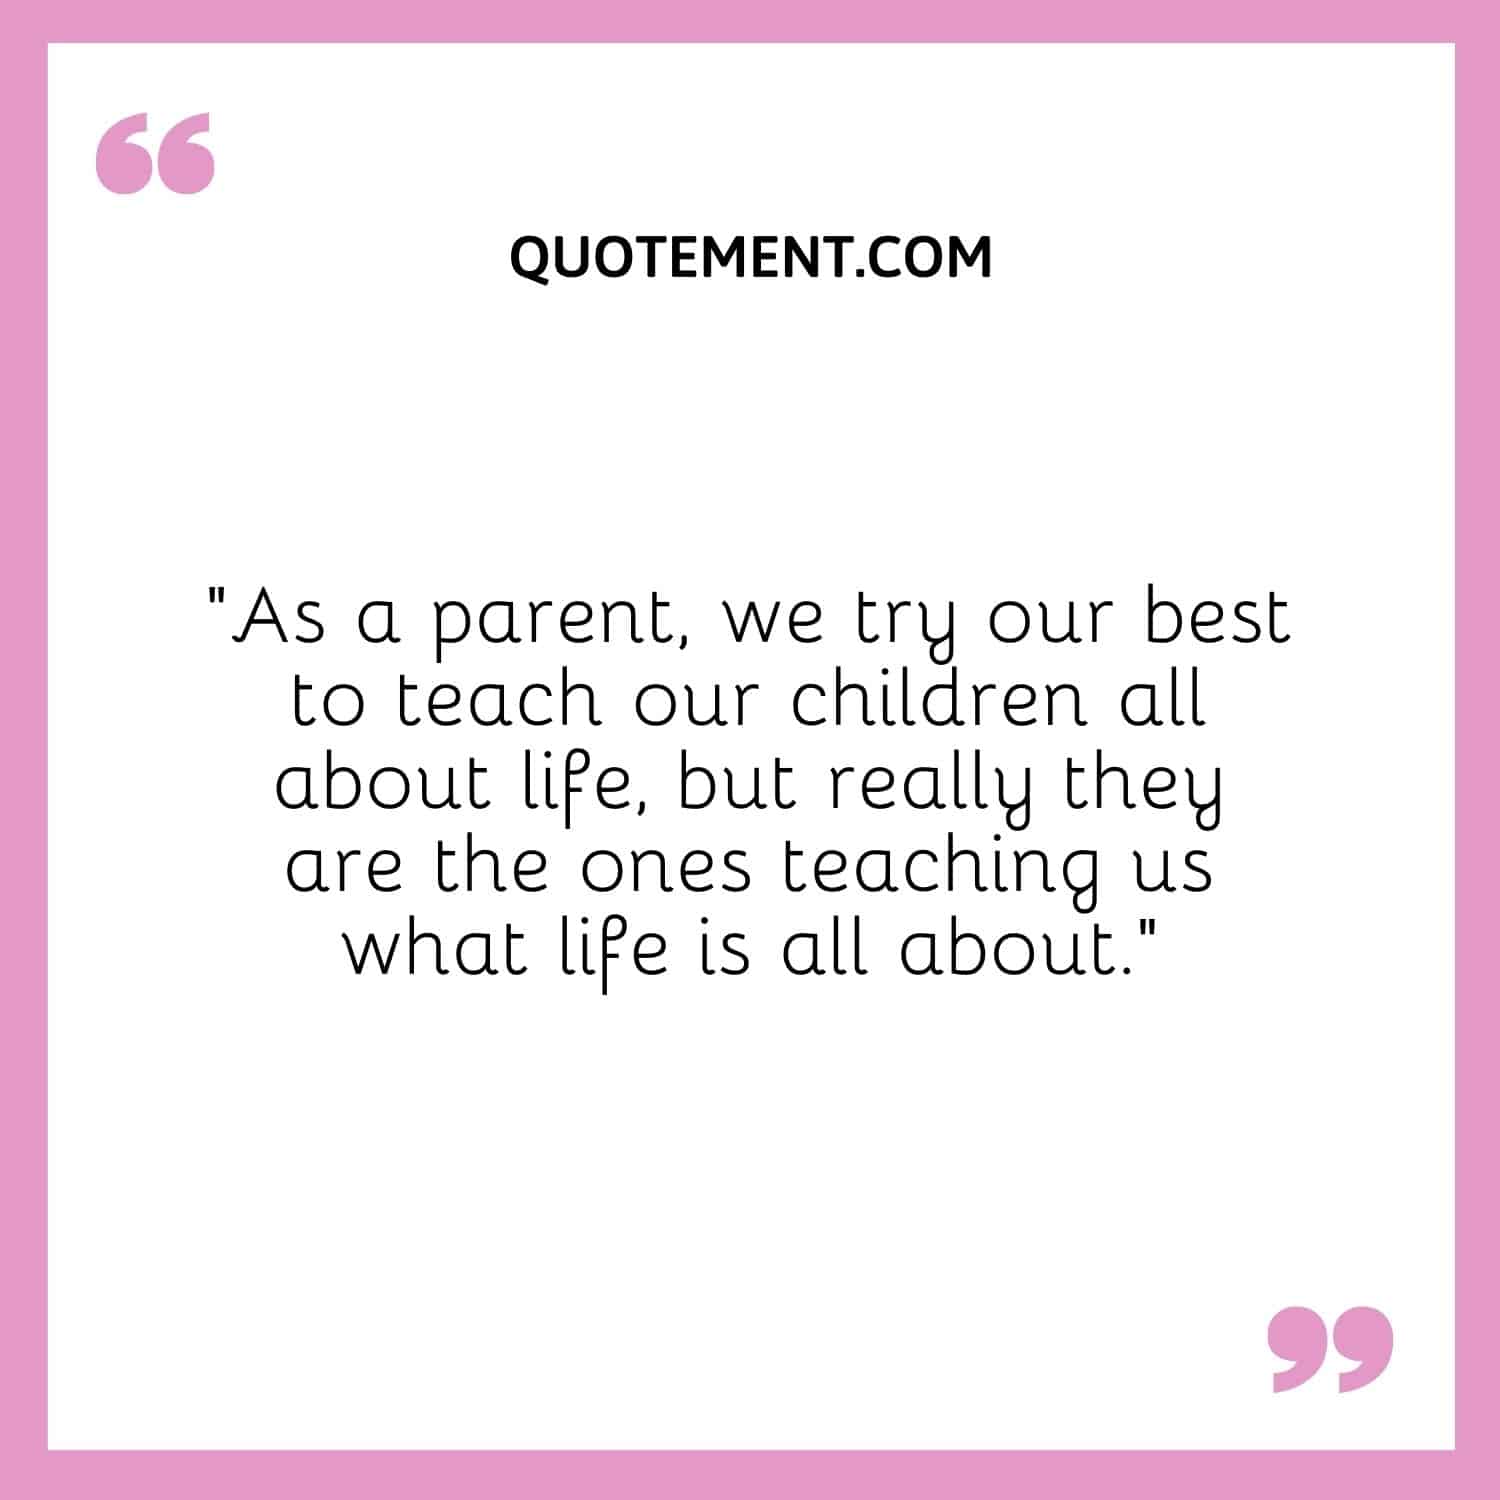 As a parent, we try our best to teach our children all about life